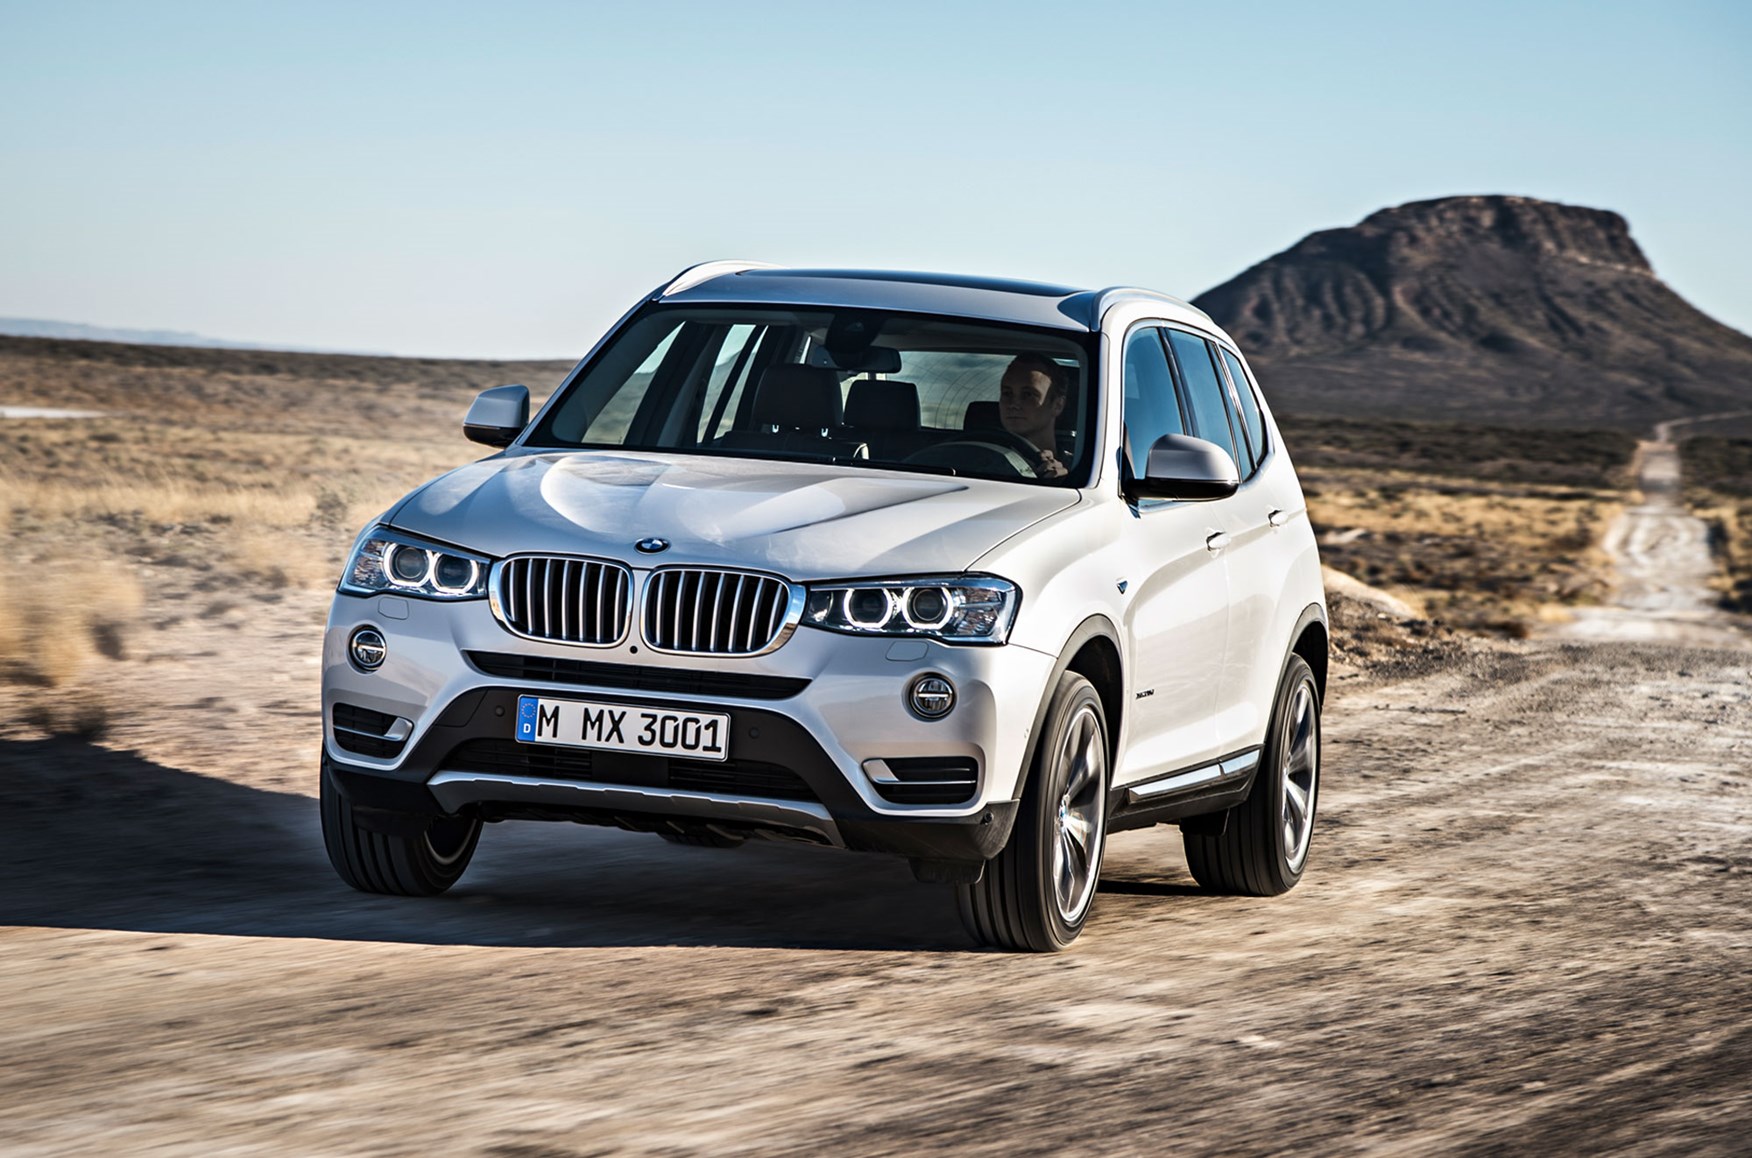 TDI Tuning - June Car of the Month - BMW X3 2.0 X Drive